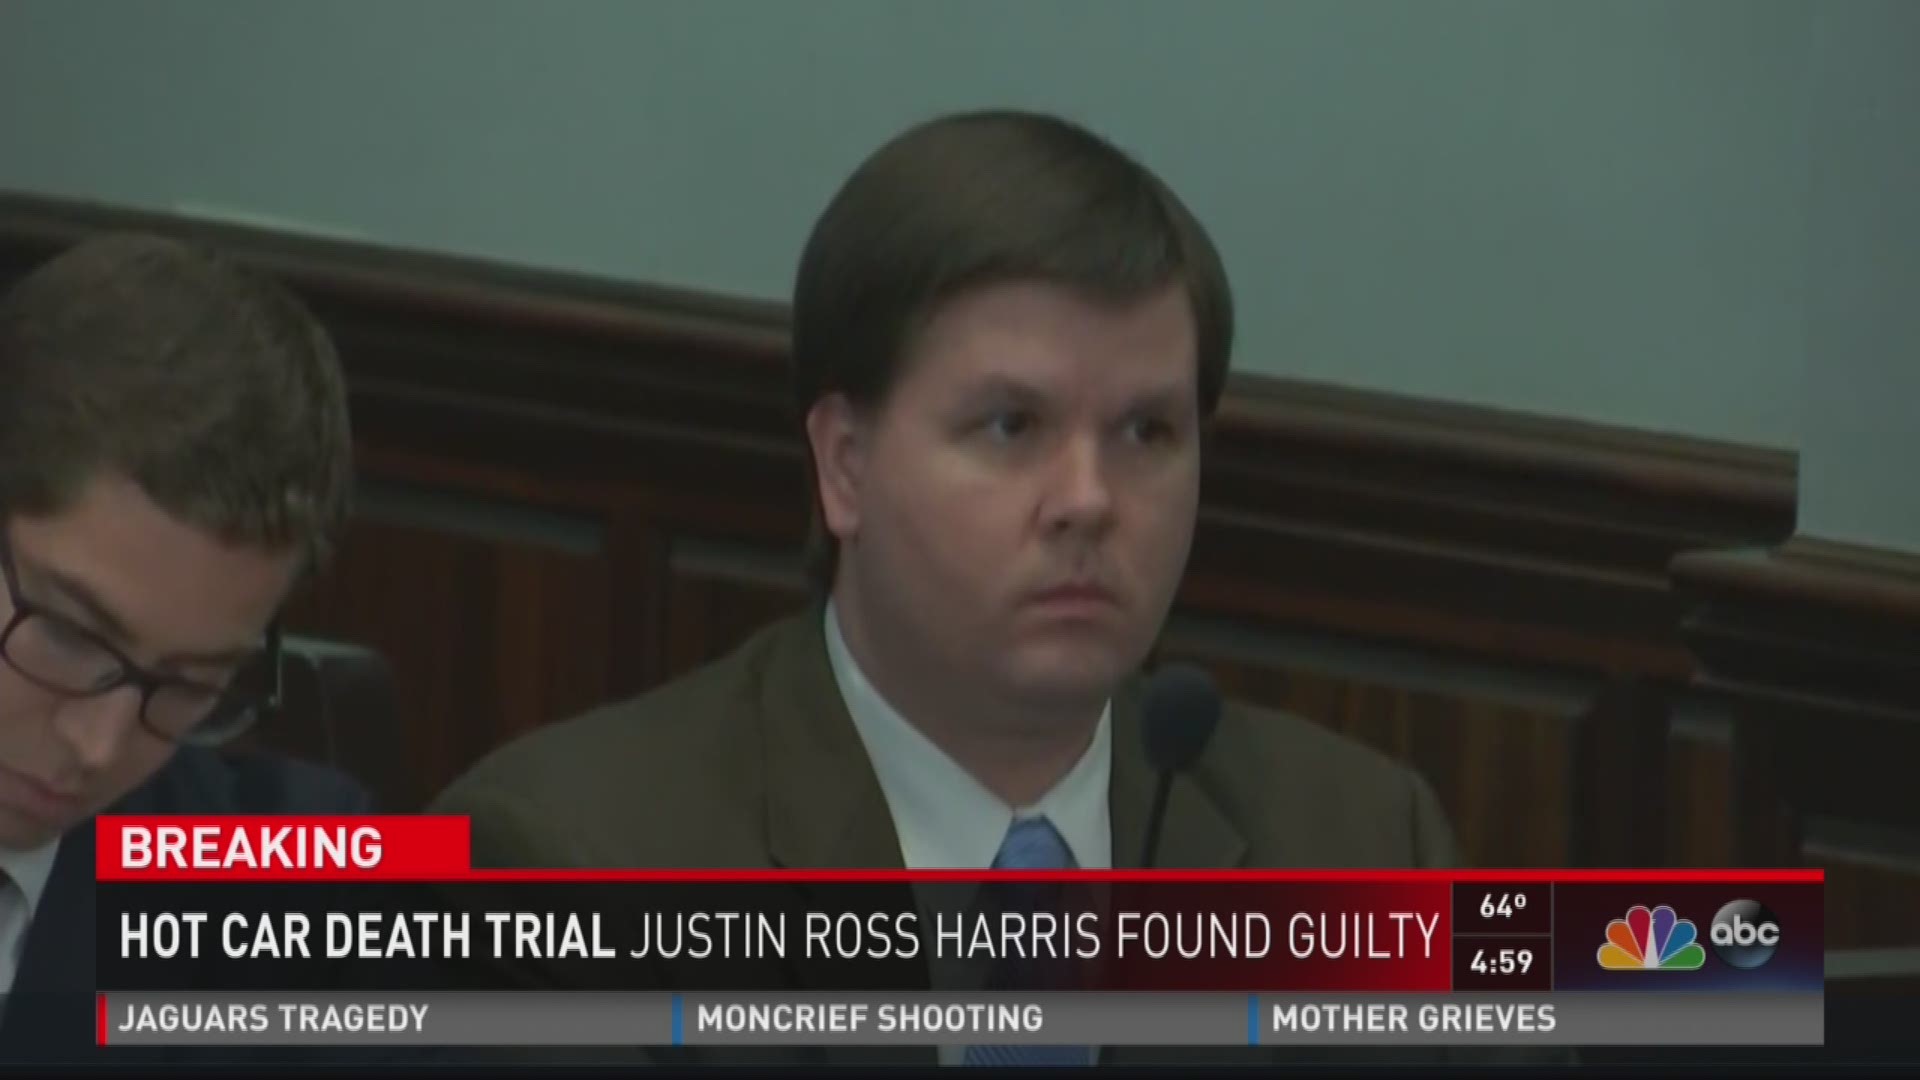 Hot car death trial: Justin Ross Harris found guilty